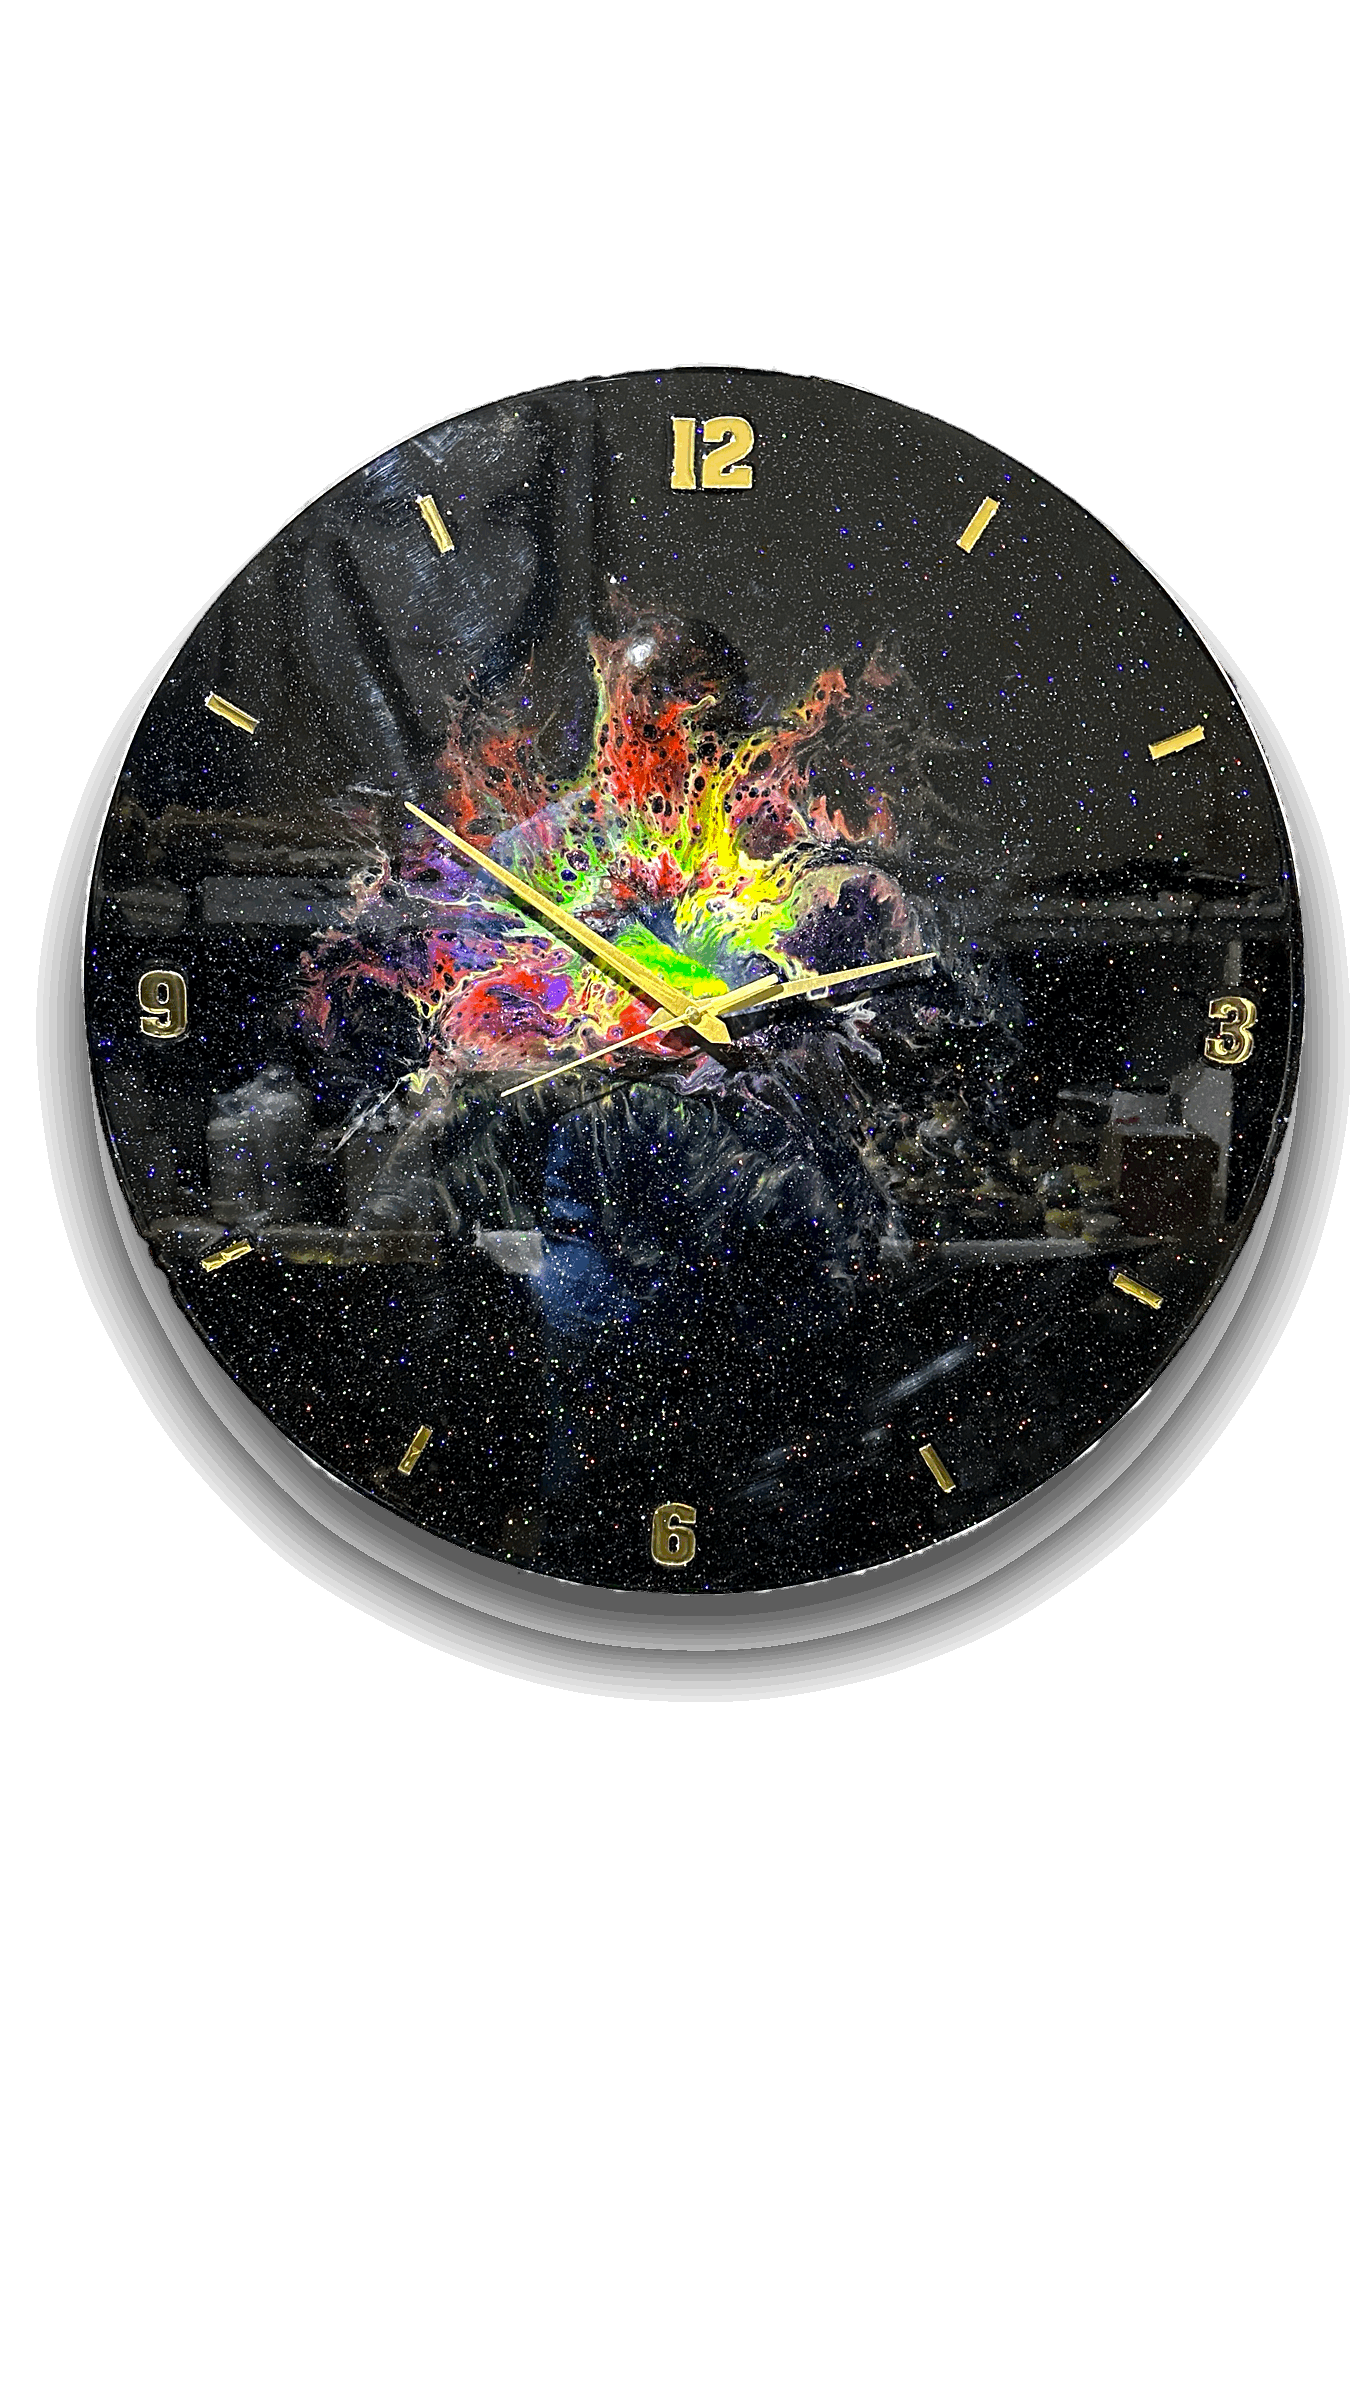 Abstract Art in Motion: Epoxy Resin Wall Clock with Shimmering Colors